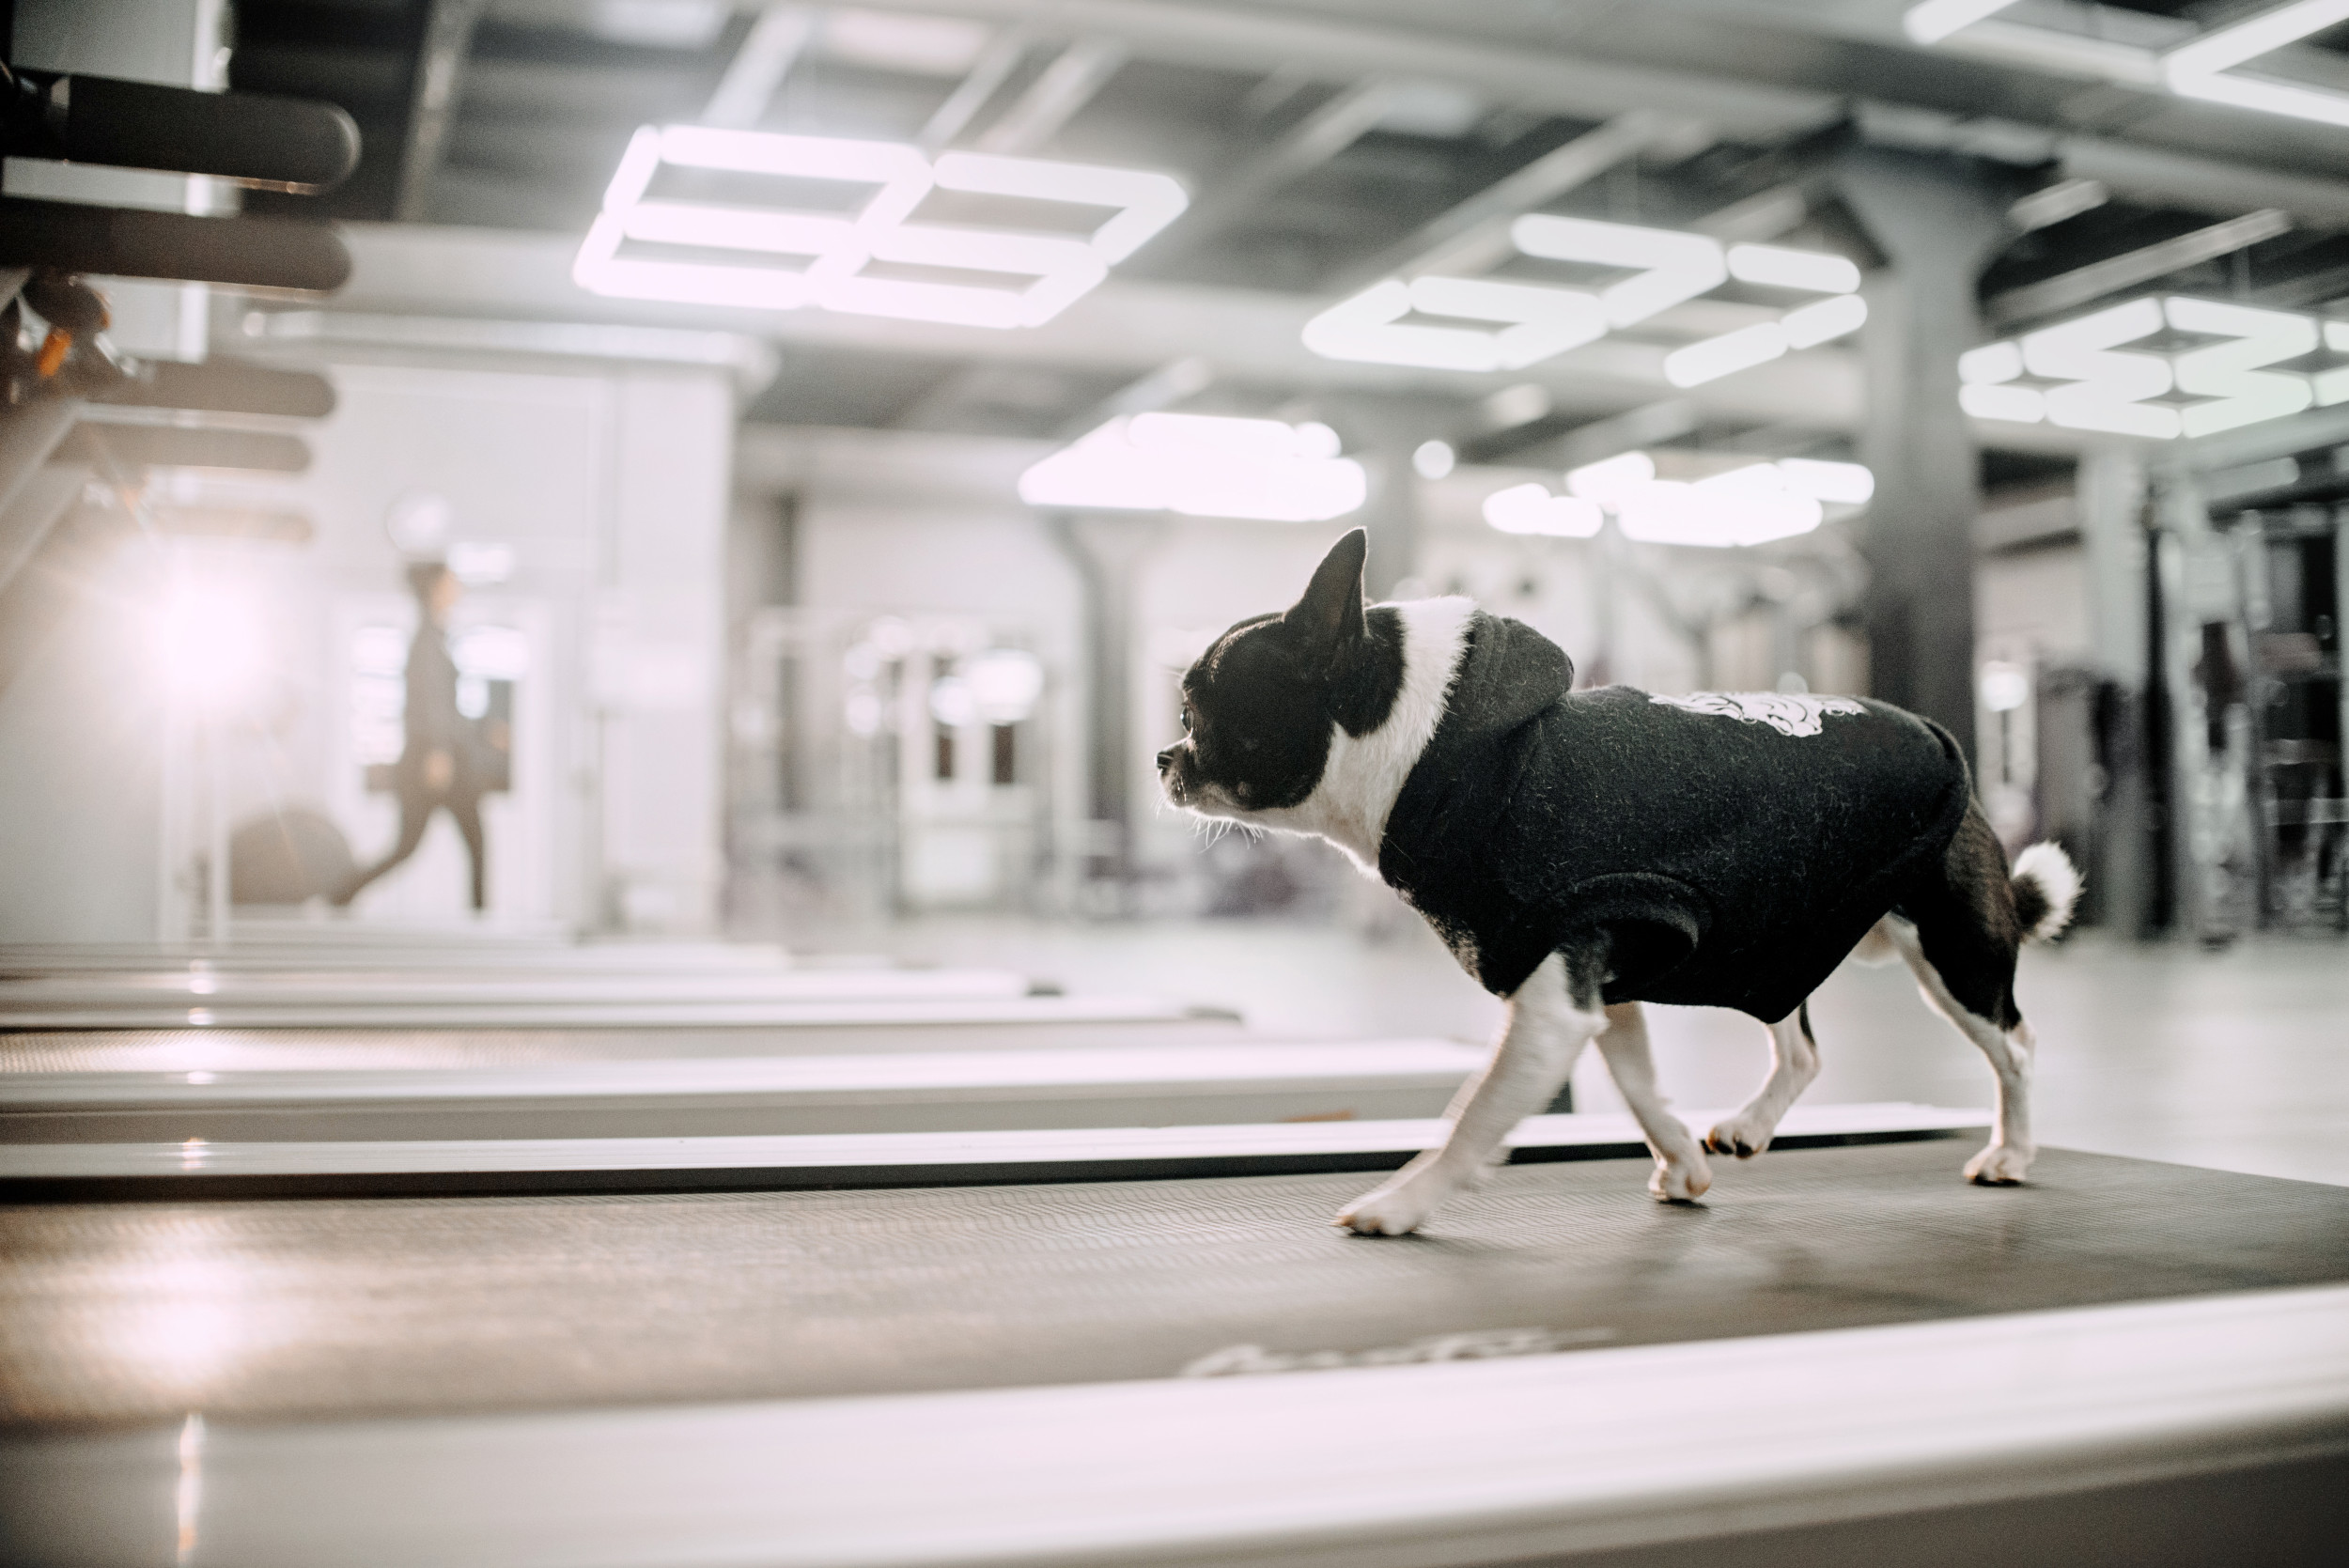 Treadmill Training For Your Dog